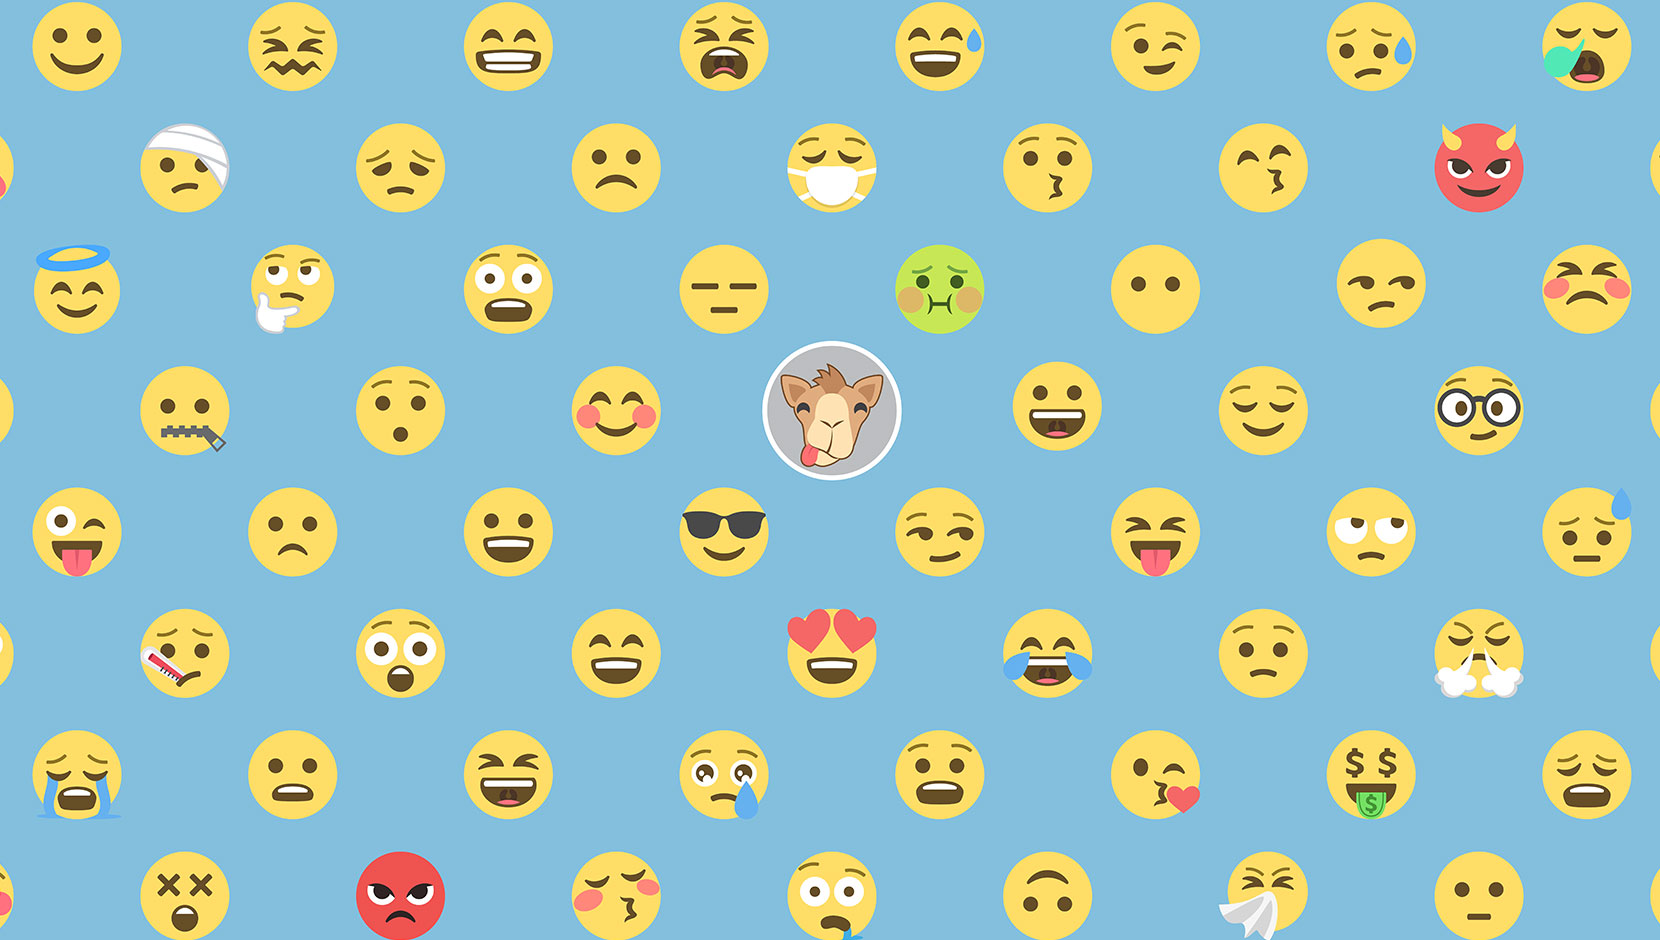 Various emoji icons across a blue image, with a custom giraffe with its tongue sticking out in the middle.